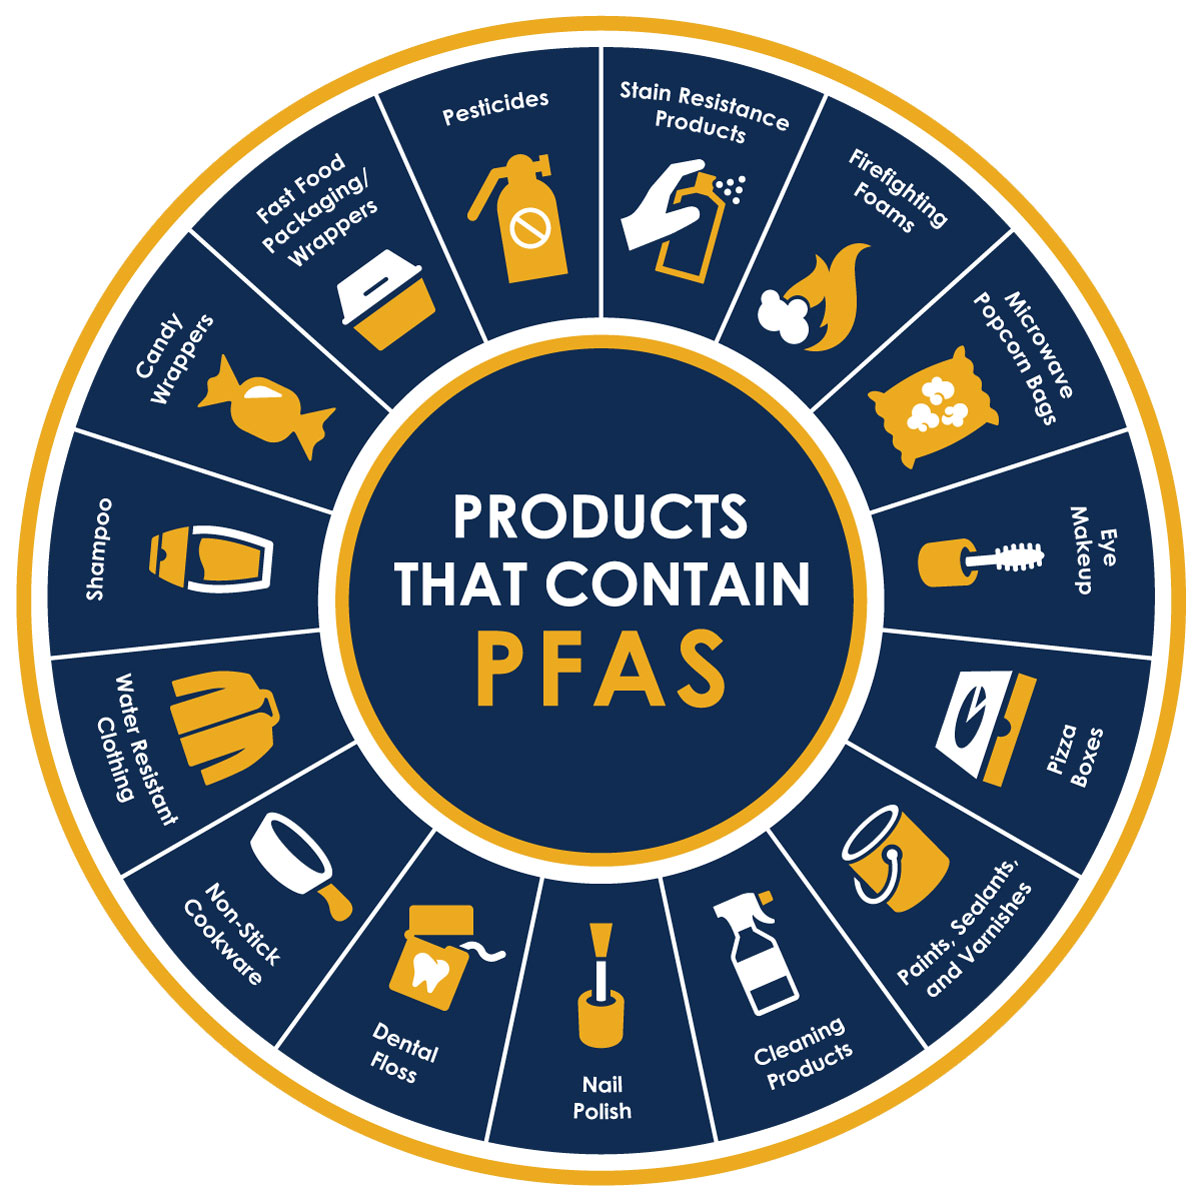 Circular graphic showing the variety of household objects and materials that may contain PFAS 